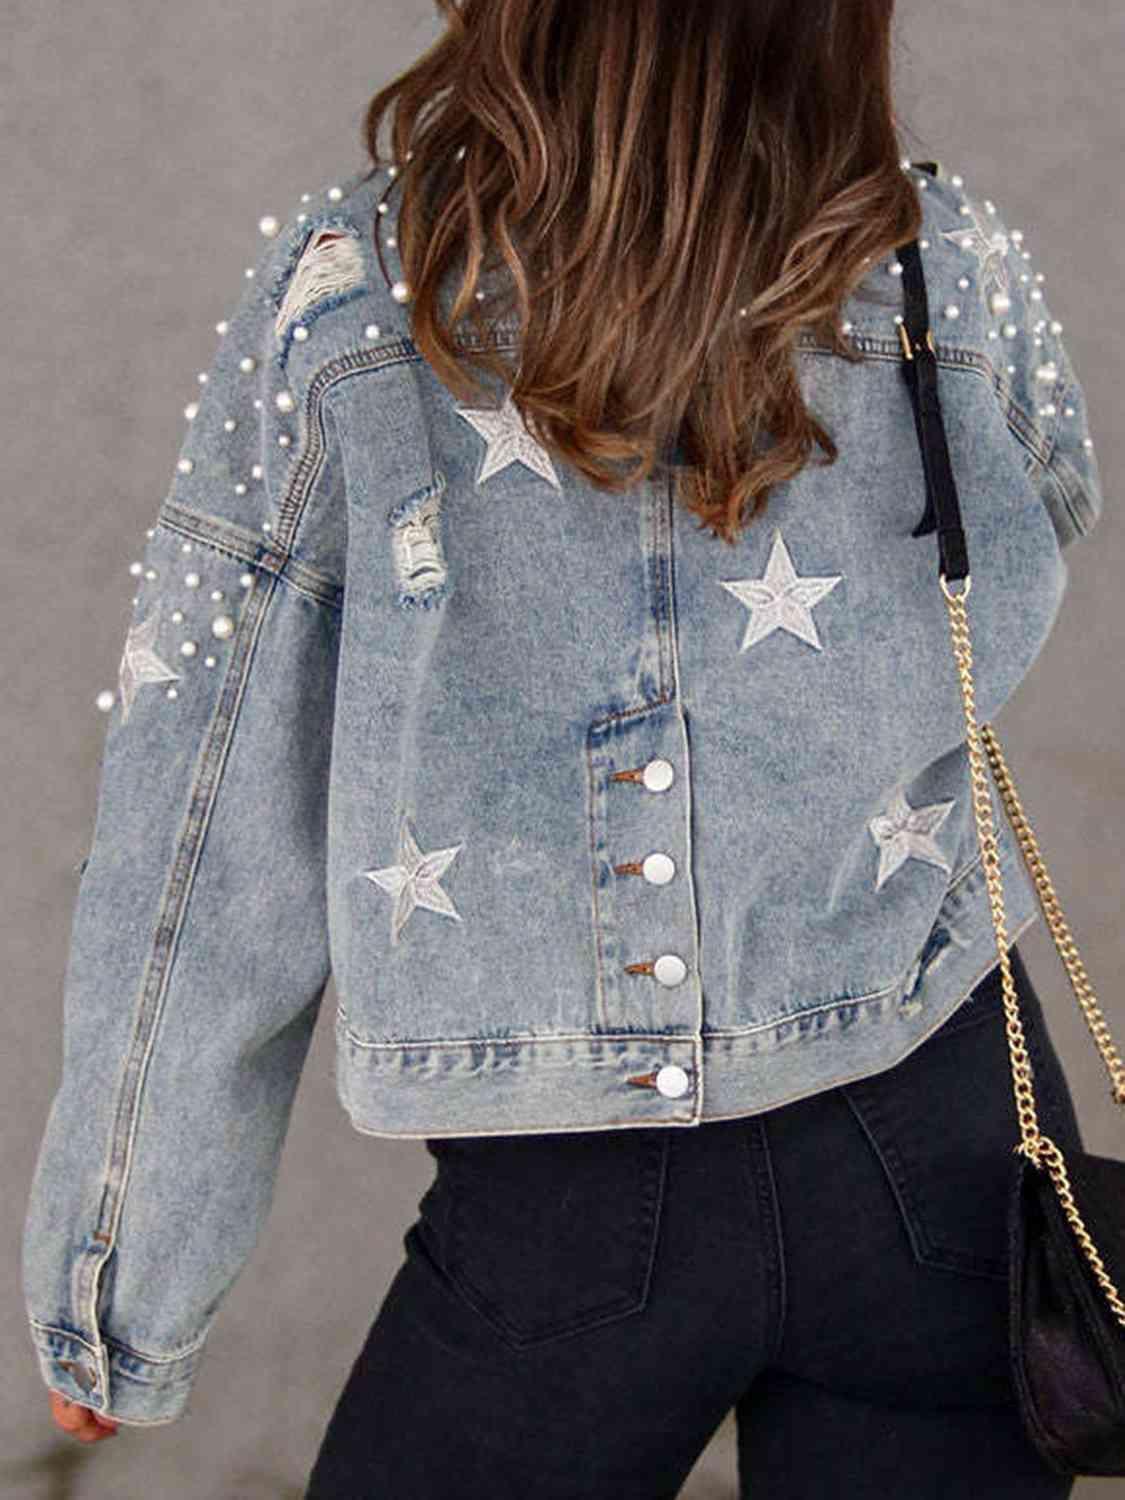 a woman wearing a jean jacket with stars on it